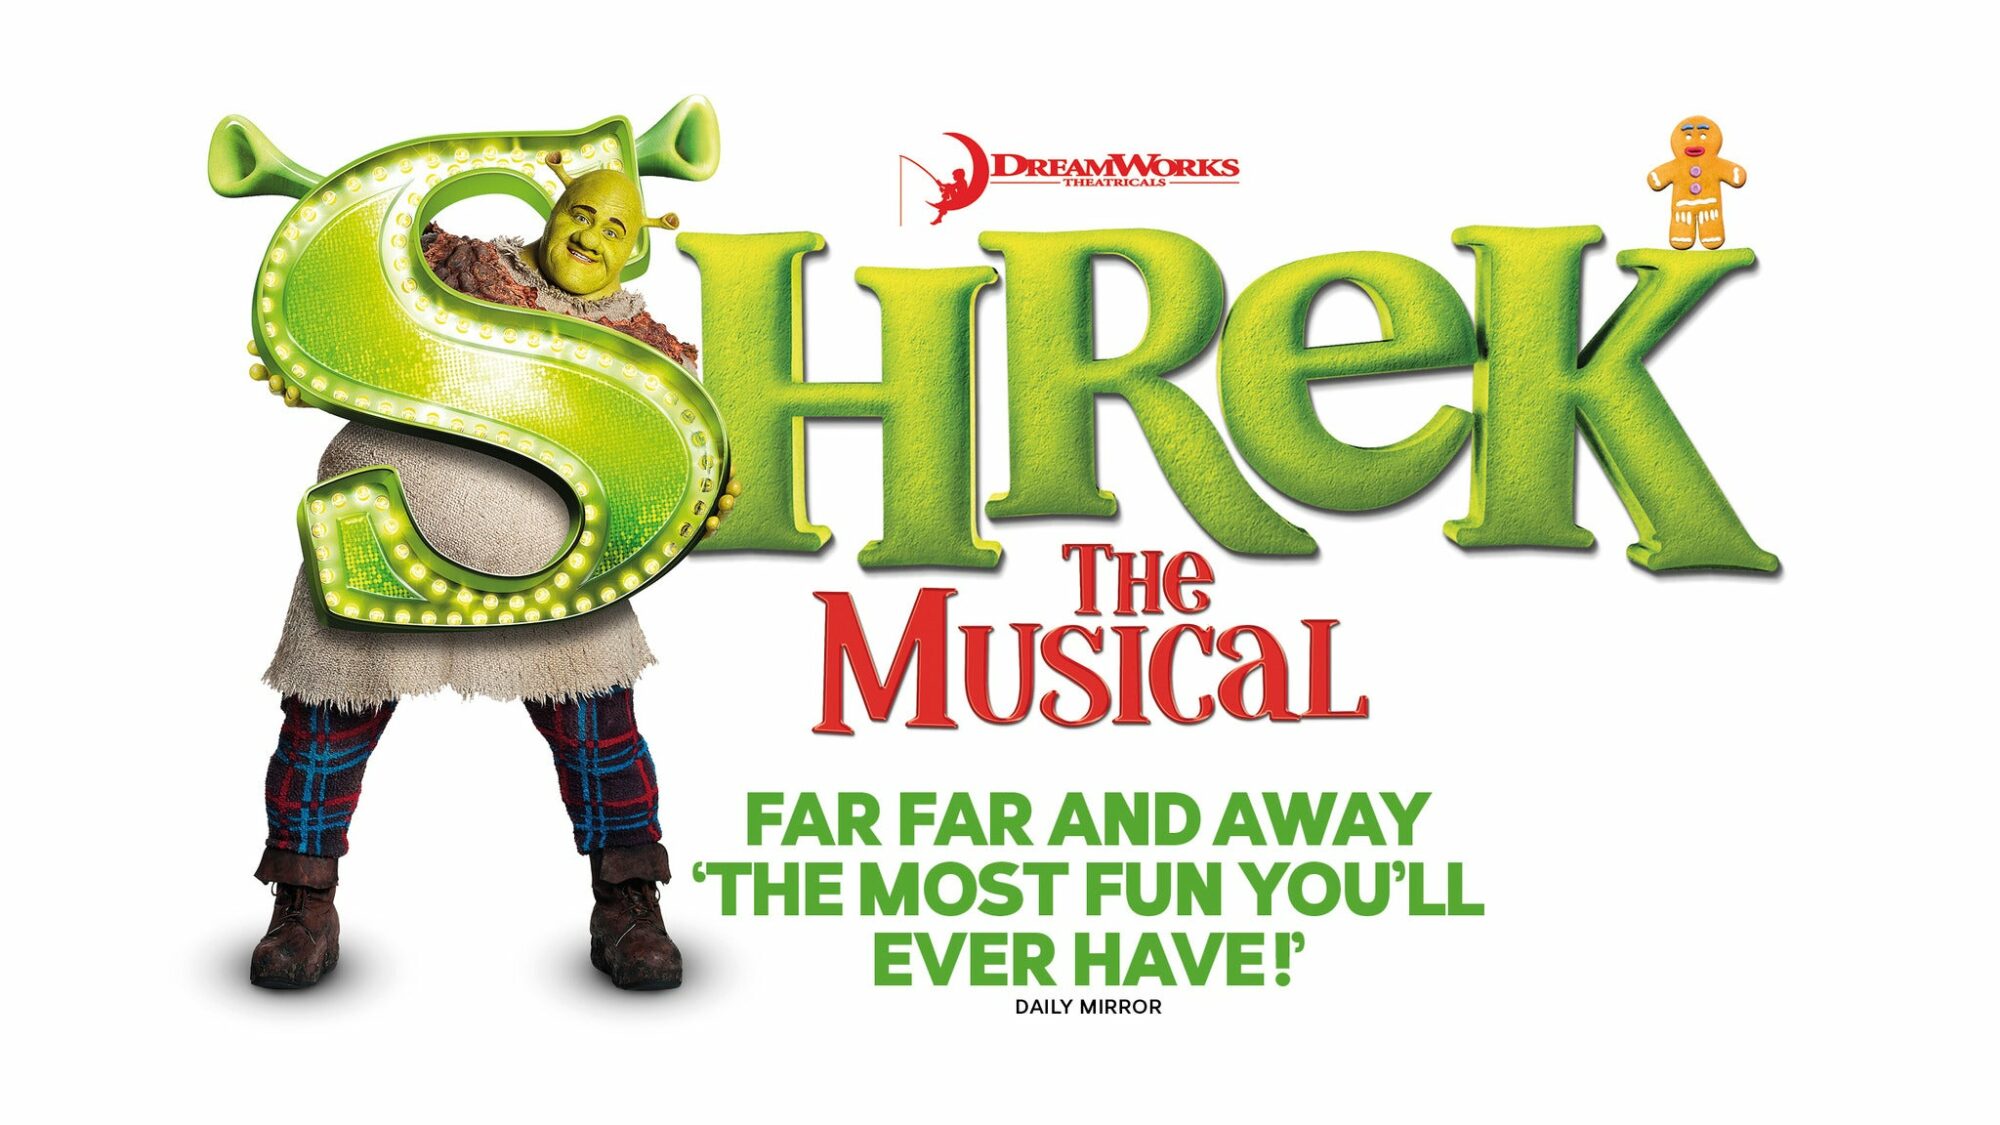 Image name Shrek The Musical JR at Whitby Pavilion Theatre Whitby the 8 image from the post Shrek: The Musical JR at Whitby Pavilion Theatre, Whitby in Yorkshire.com.